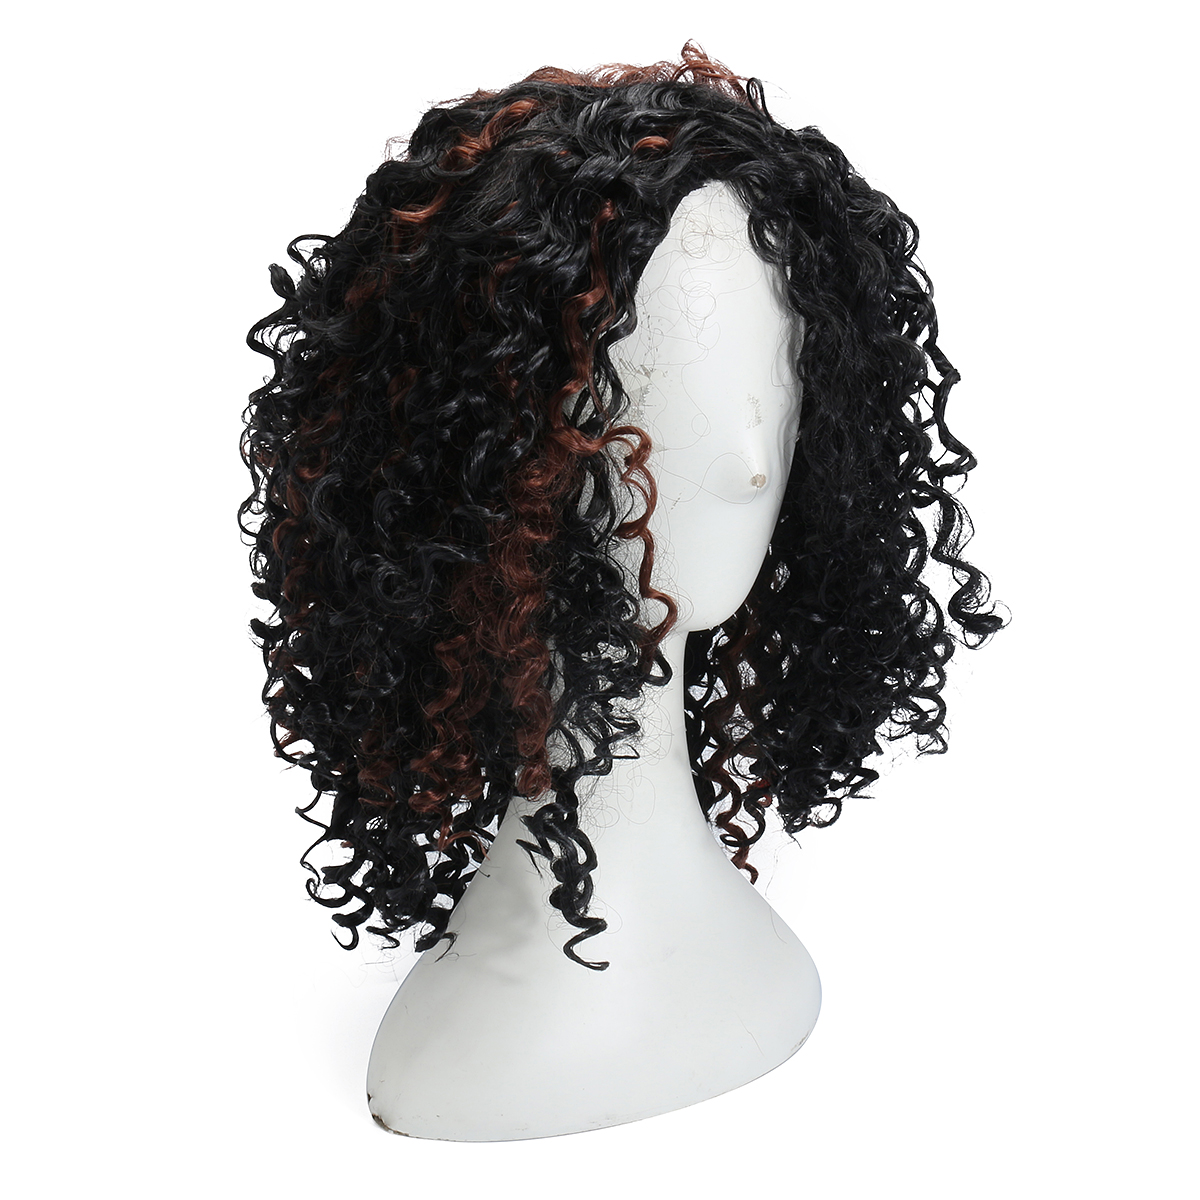 Brazilian-Black-Brown-Hair-Deep-Wavy-Curly-Lace-Front-Full-Wig-1230999-4